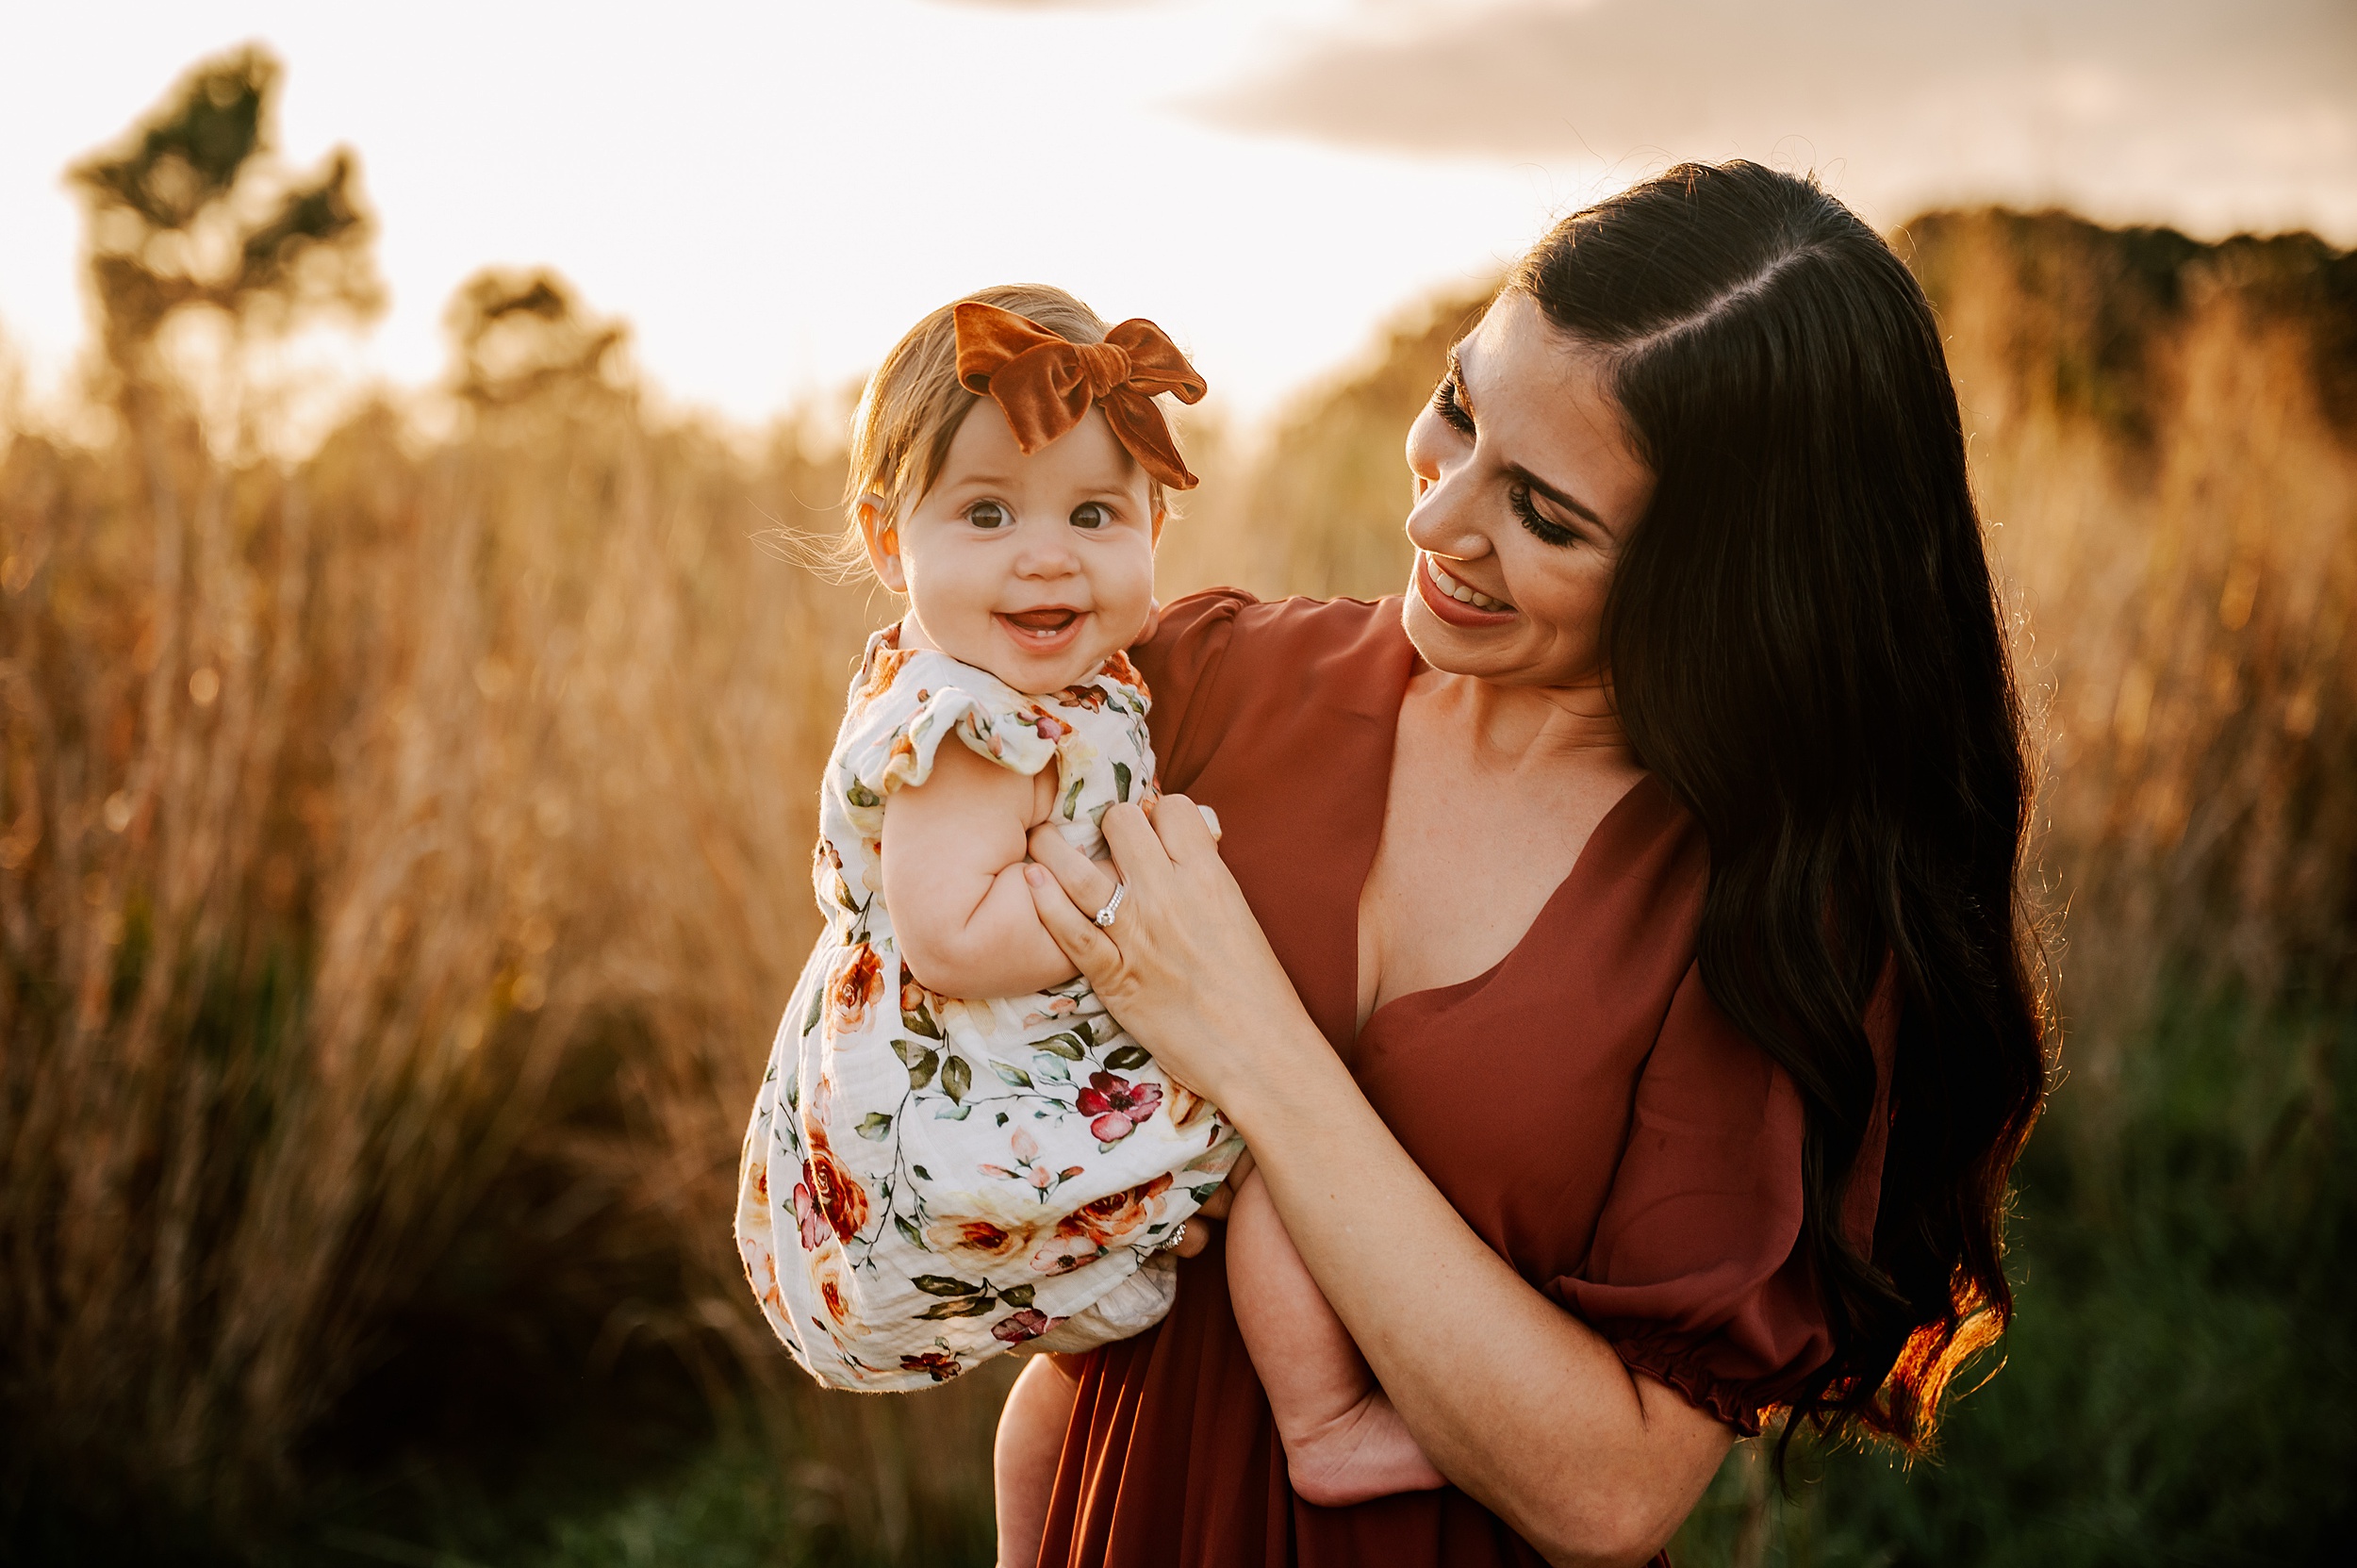 A mother stands in a field of tall golden grass at sunset while holding her young toddler daughter